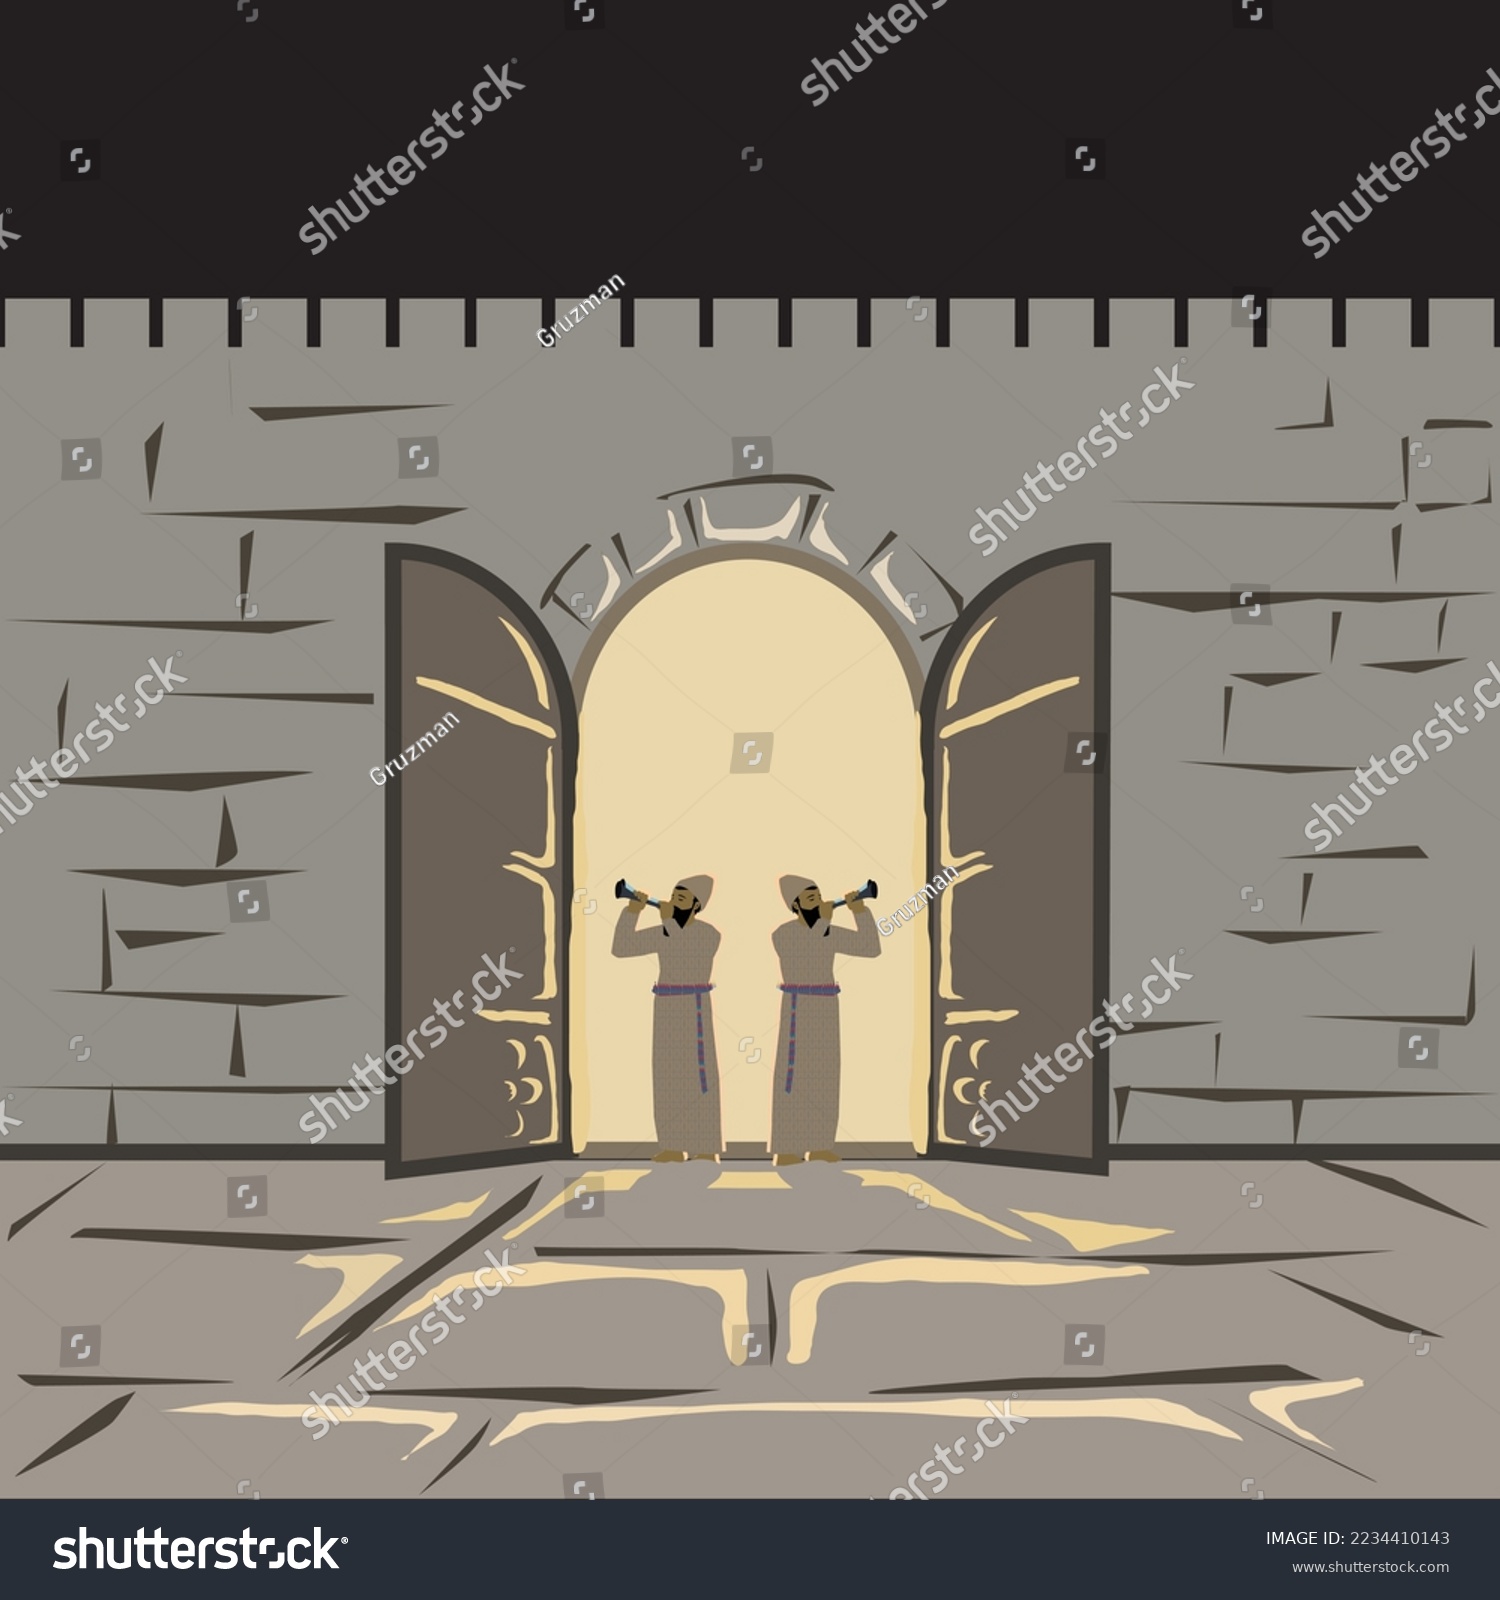 stock-vector-two-priests-blow-silver-trumpets-at-an-open-gate-of-the-famous-holy-jewish-temple...jpg